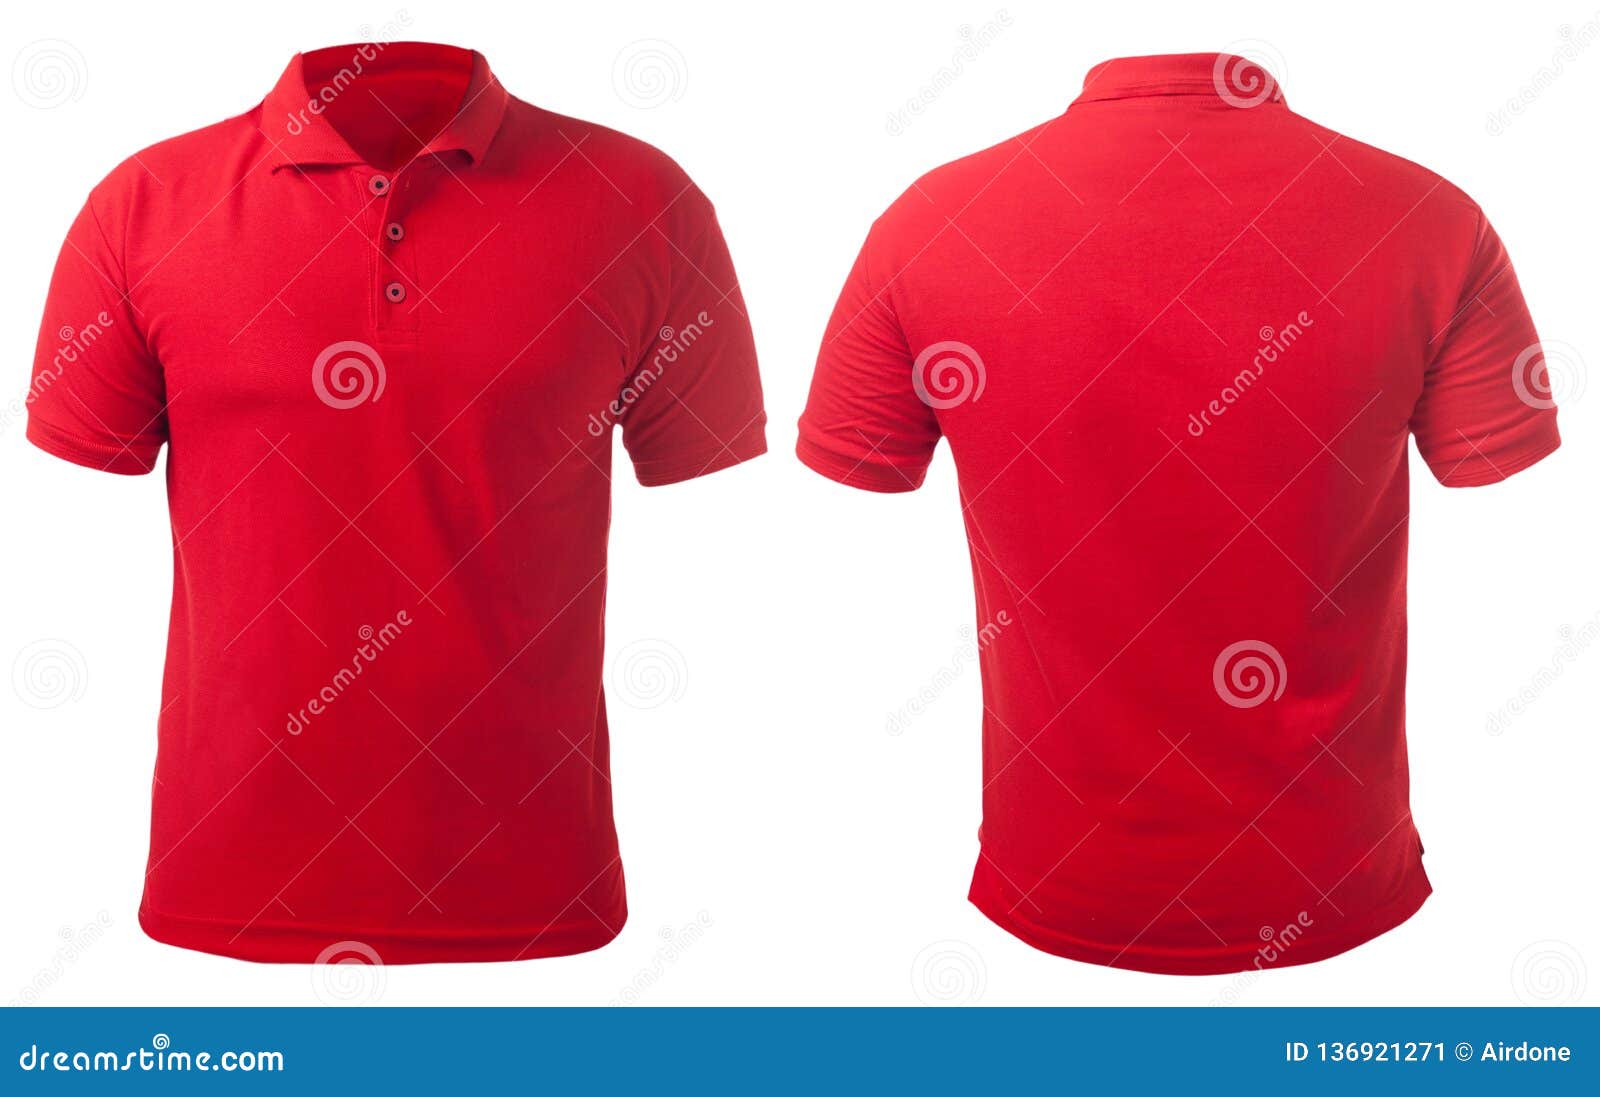 Red Collared Shirt Design Template Stock Image - Image of chest ...